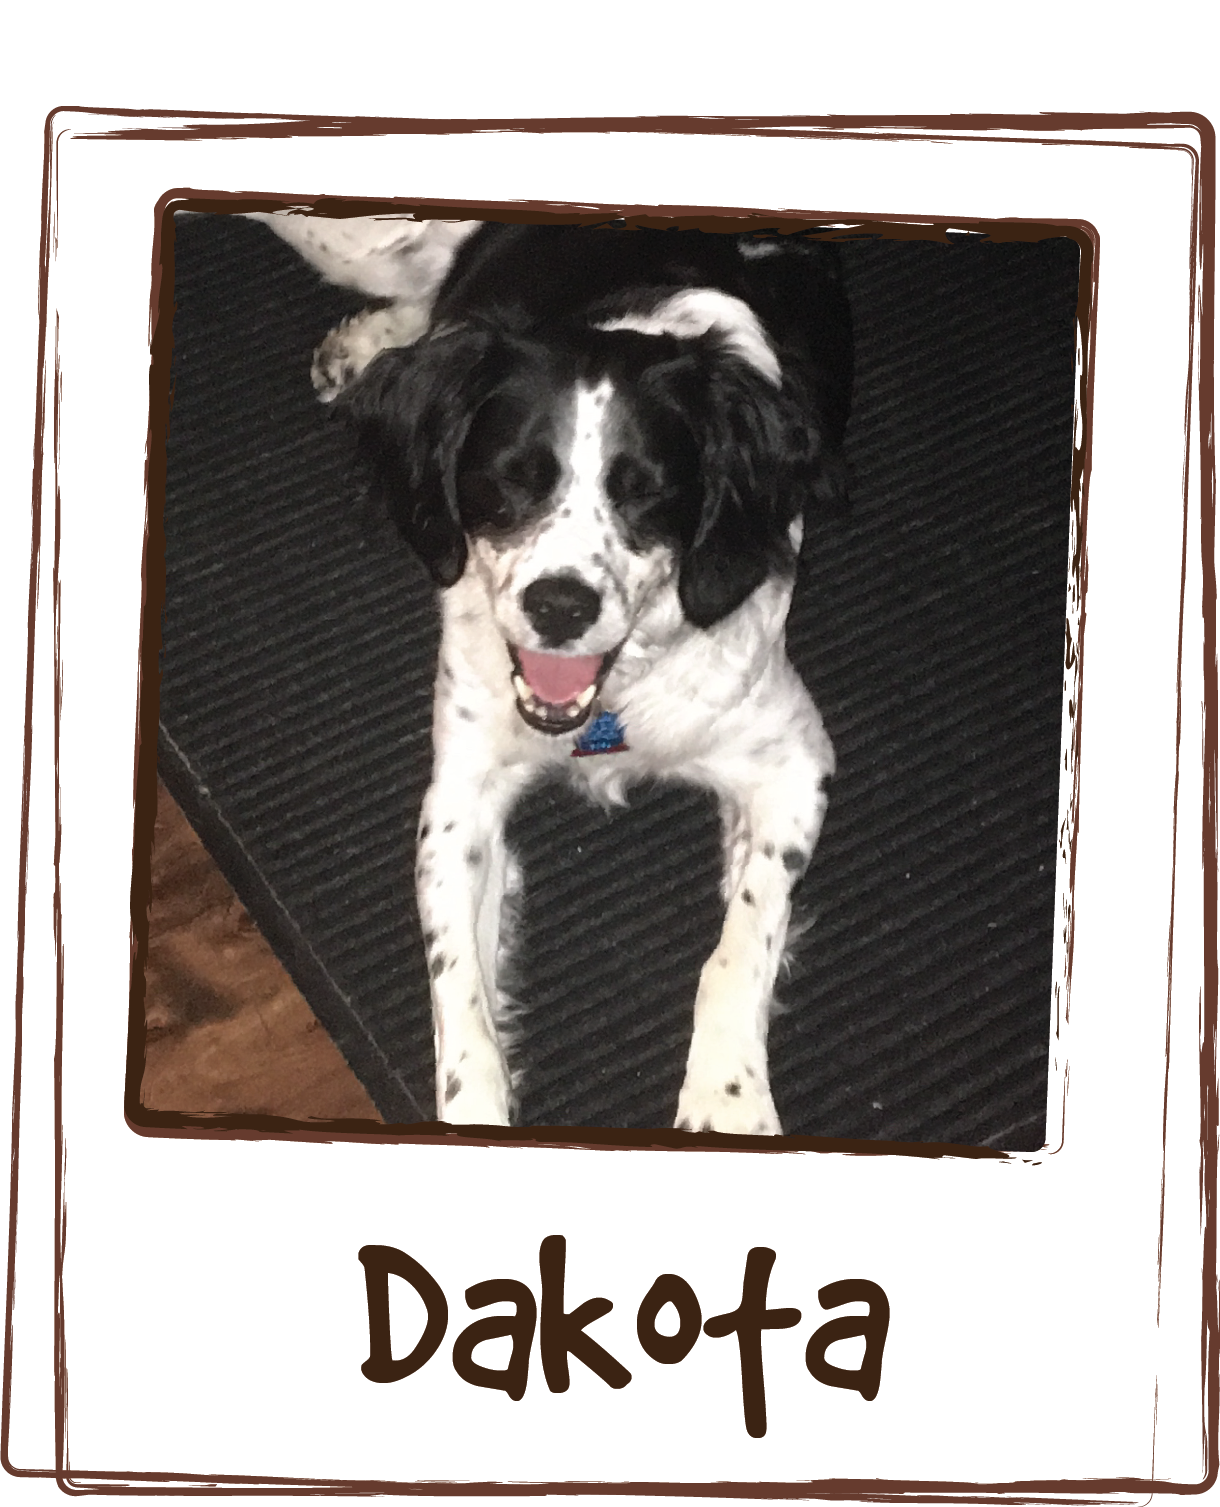  “We adopted Dakota a year ago from a rescue. She is 10 years old and I’m quite sure she has a history of abuse. She is absolutely terrified of thunderstorms and fireworks. &nbsp;I seriously think she could have a heart attack she gets so worked up s